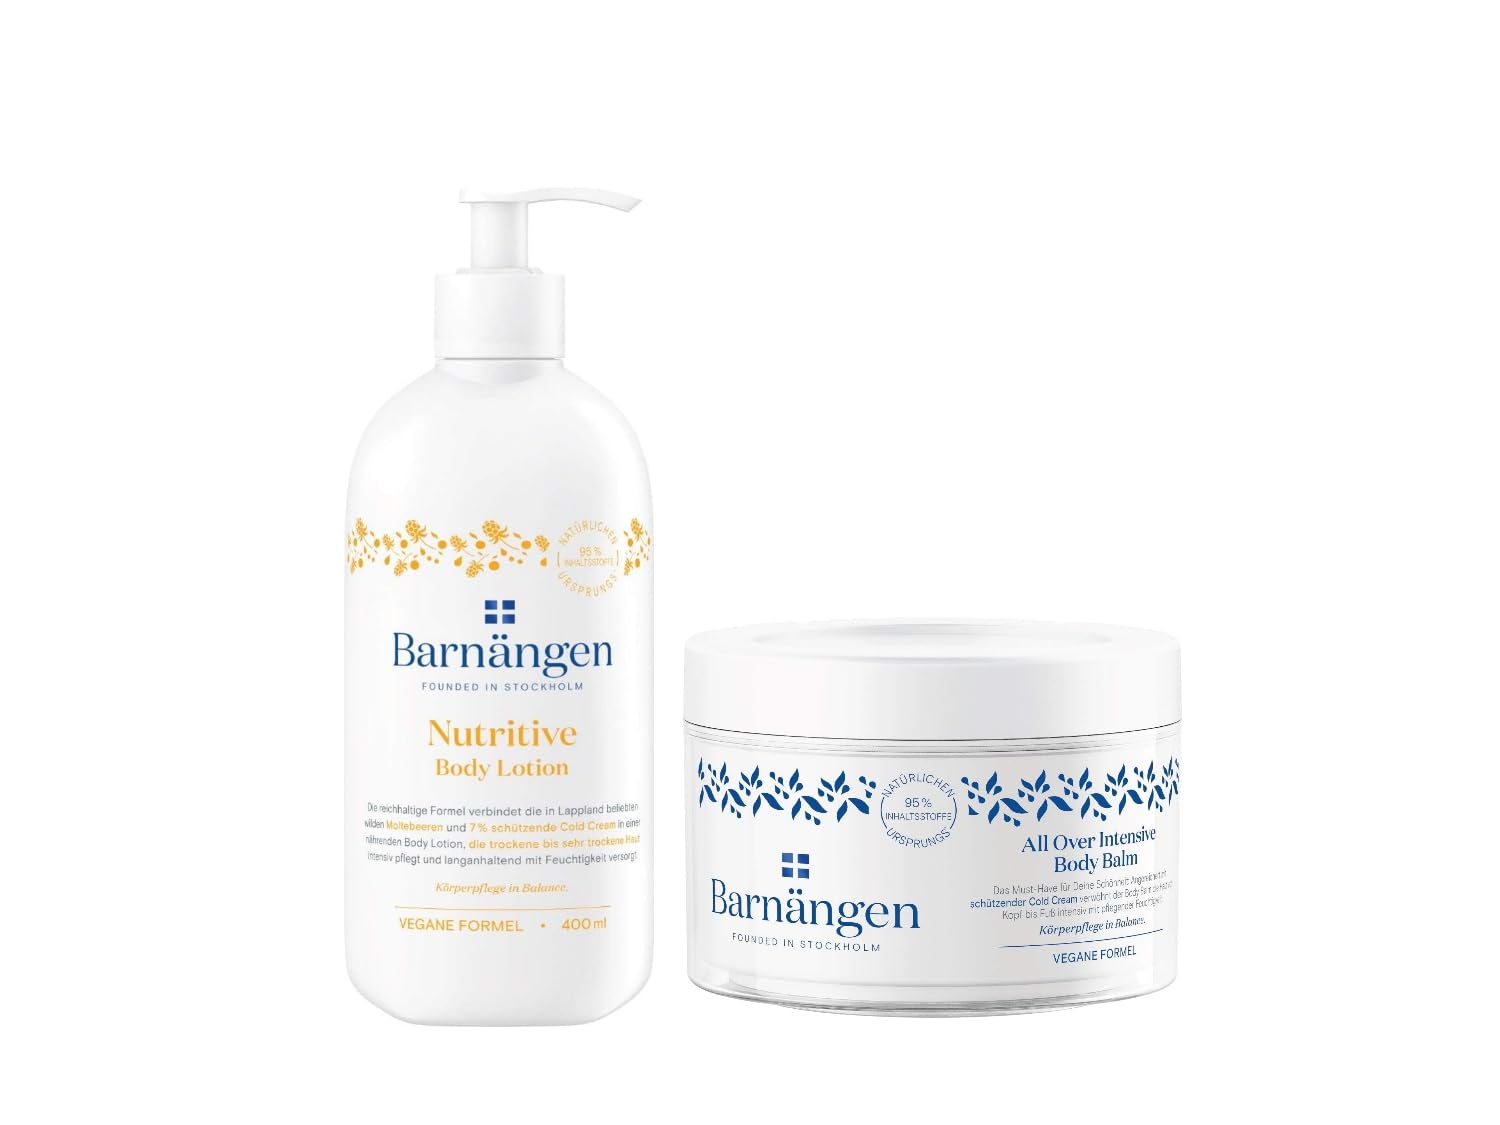 Barnängen Body Lotion Nutritive 400ml with Cold Cream & Barnängen Body Balm All Over Intensive 200ml for Dry to Very Dry Skin Vegan Formula Dermatologically Tested